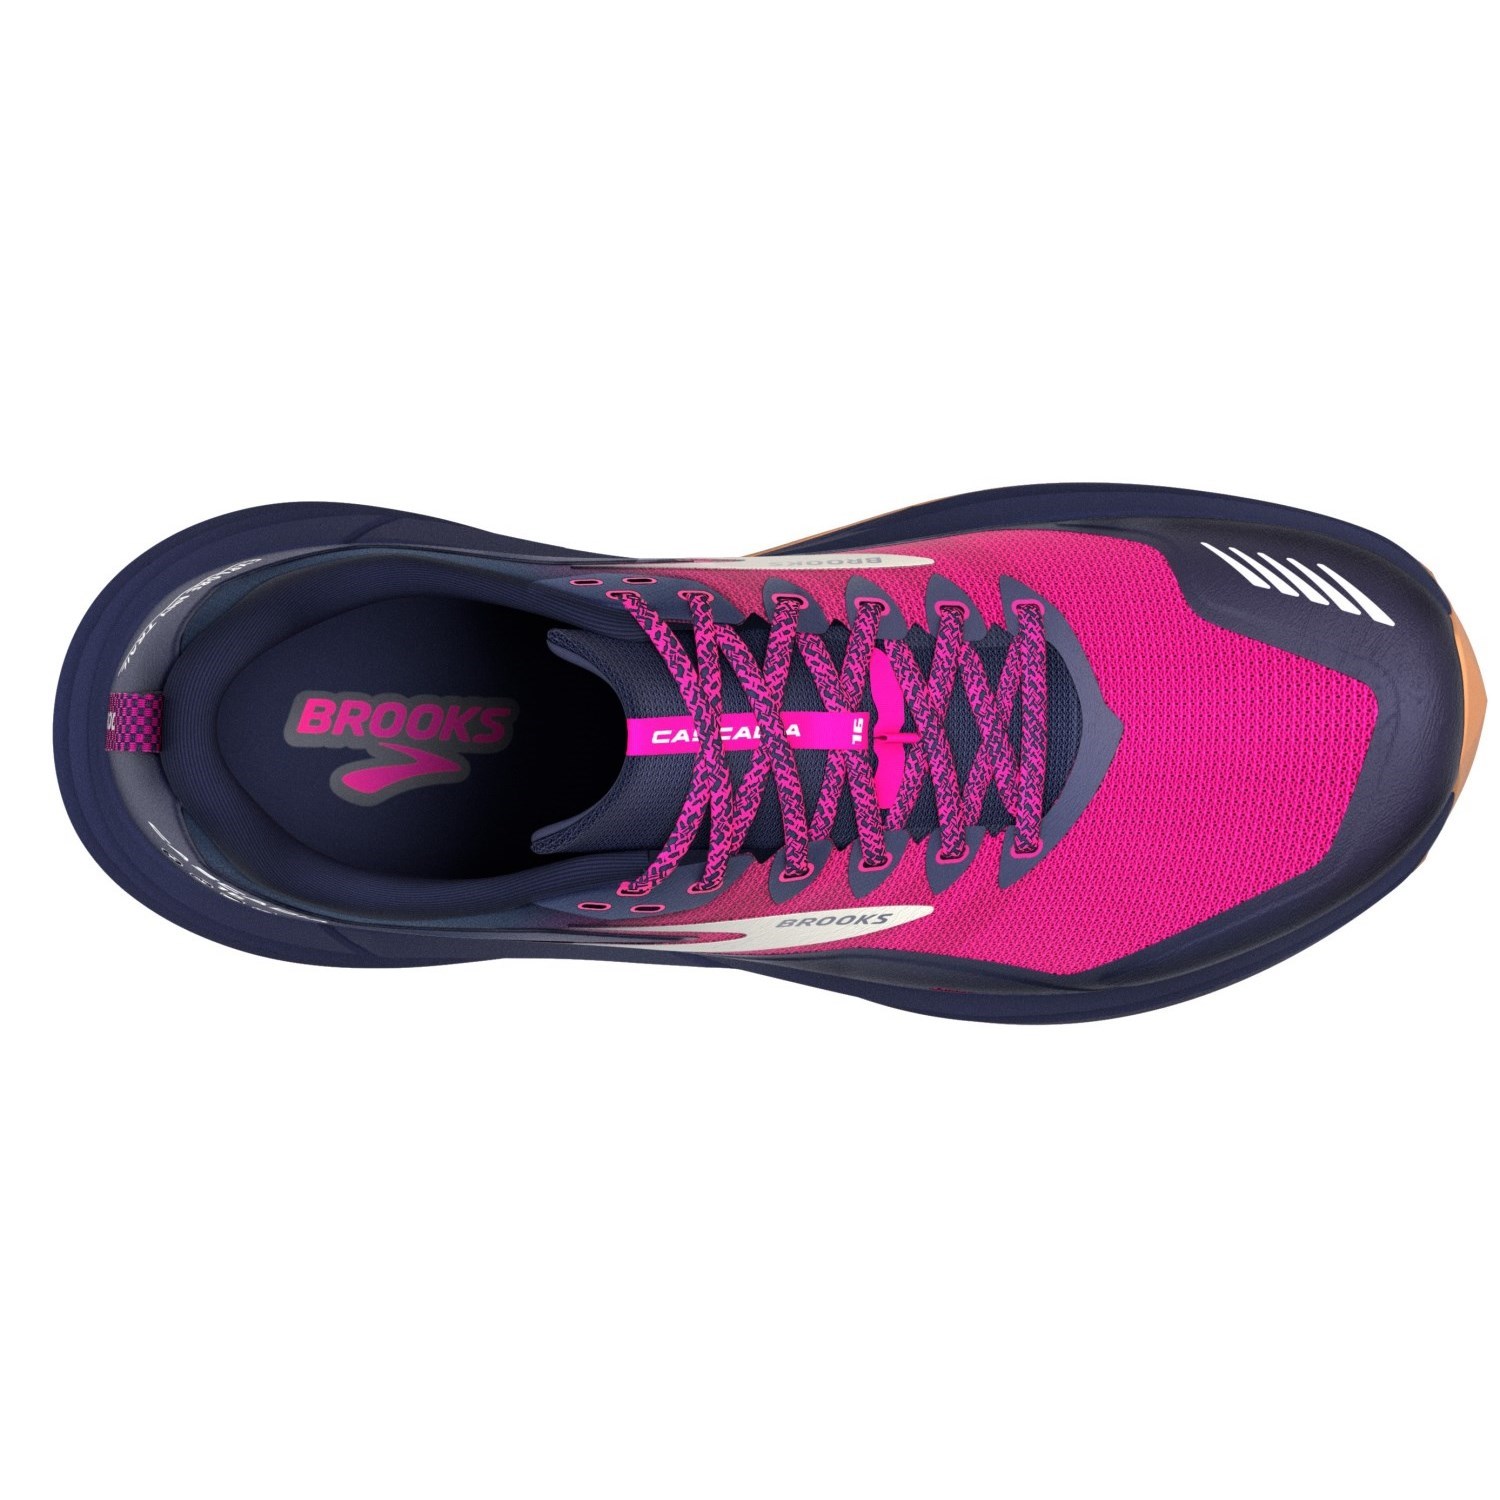 Brooks Cascadia 16 - Womens Trail Running Shoes - Peacoat/Pink/Suit ...